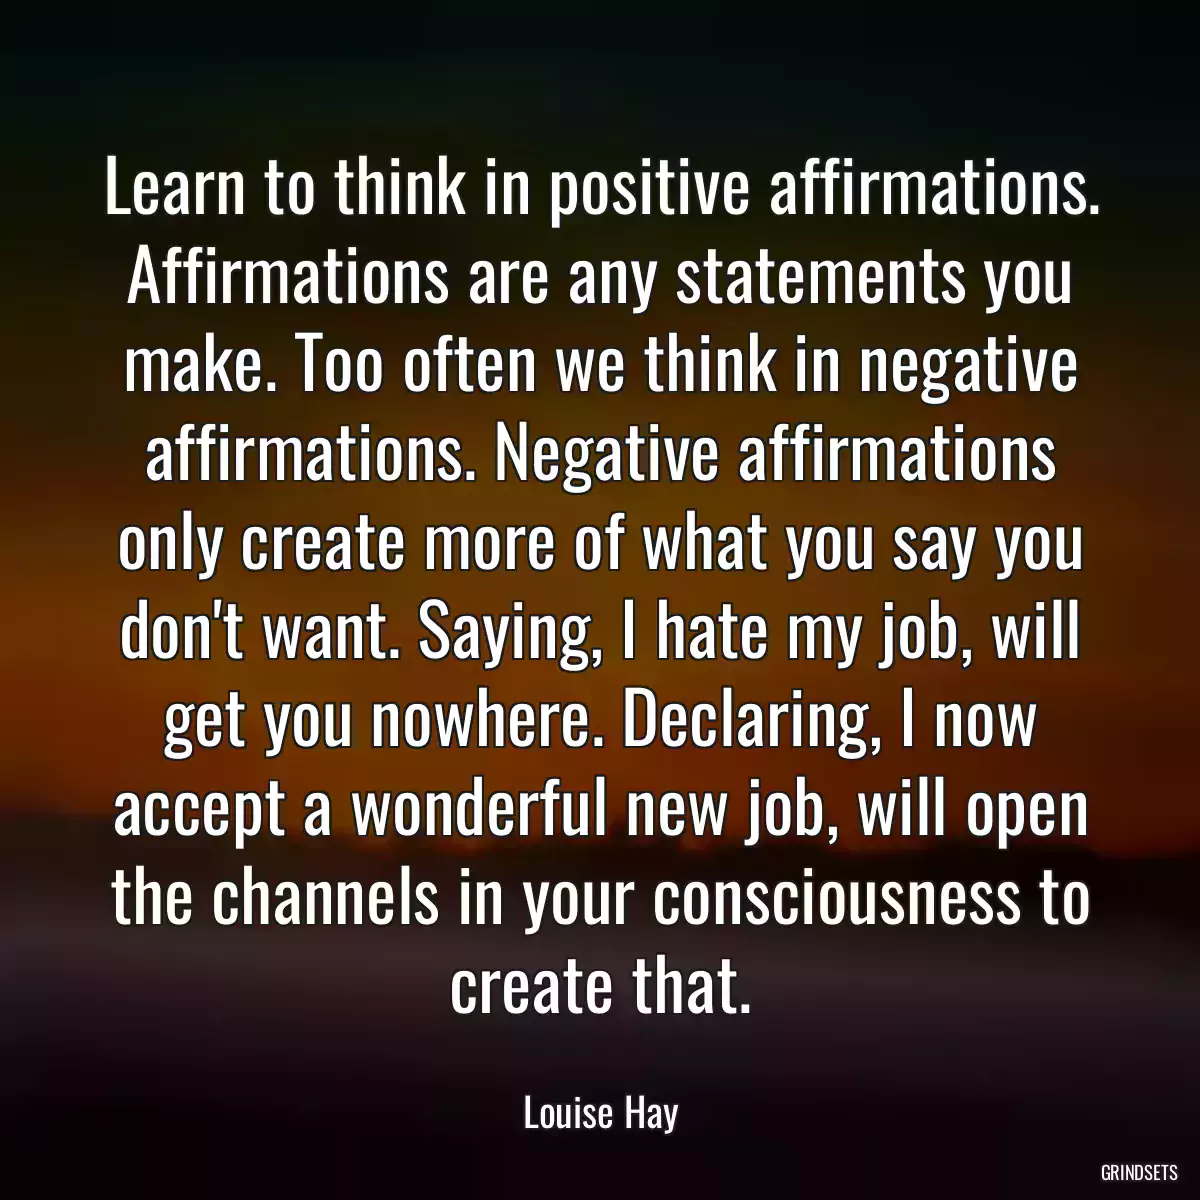 Learn to think in positive affirmations. Affirmations are any statements you make. Too often we think in negative affirmations. Negative affirmations only create more of what you say you don\'t want. Saying, I hate my job, will get you nowhere. Declaring, I now accept a wonderful new job, will open the channels in your consciousness to create that.